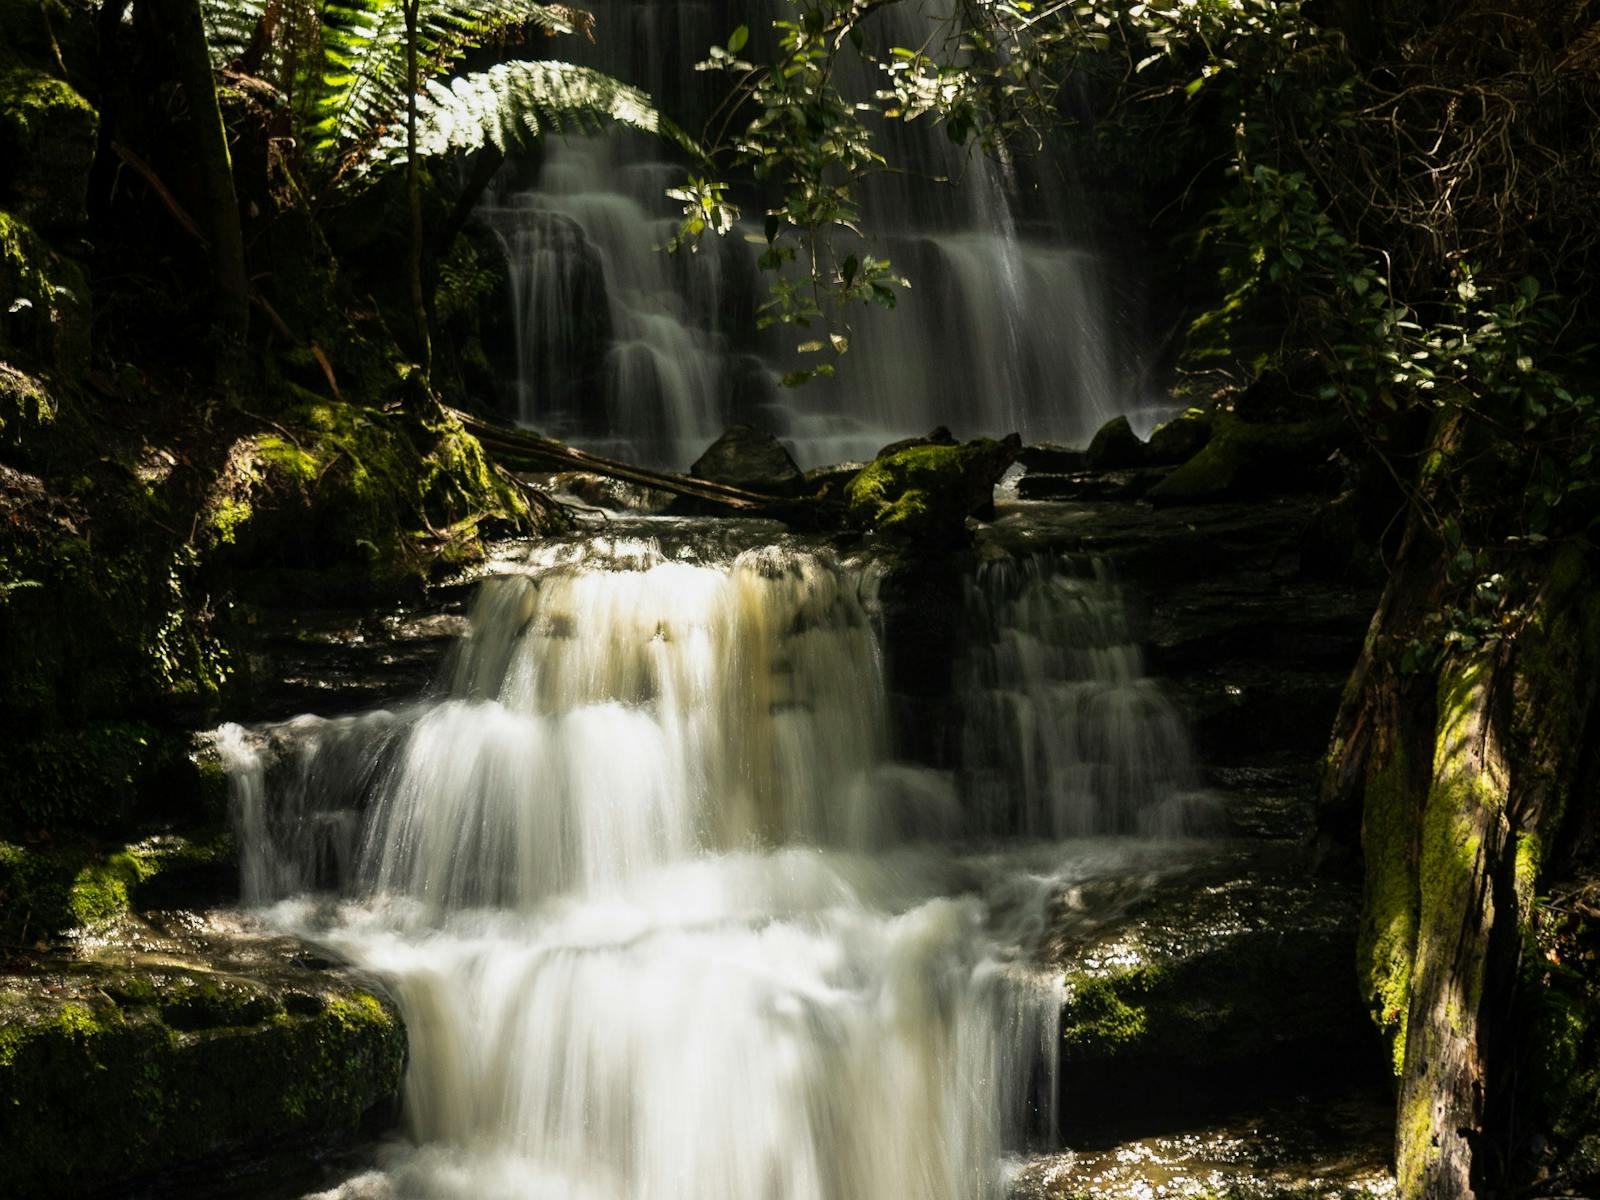 Rushing Myrtle Gully Falls in green wilderness setting at foothills of Mt. Wellington, Hobart.